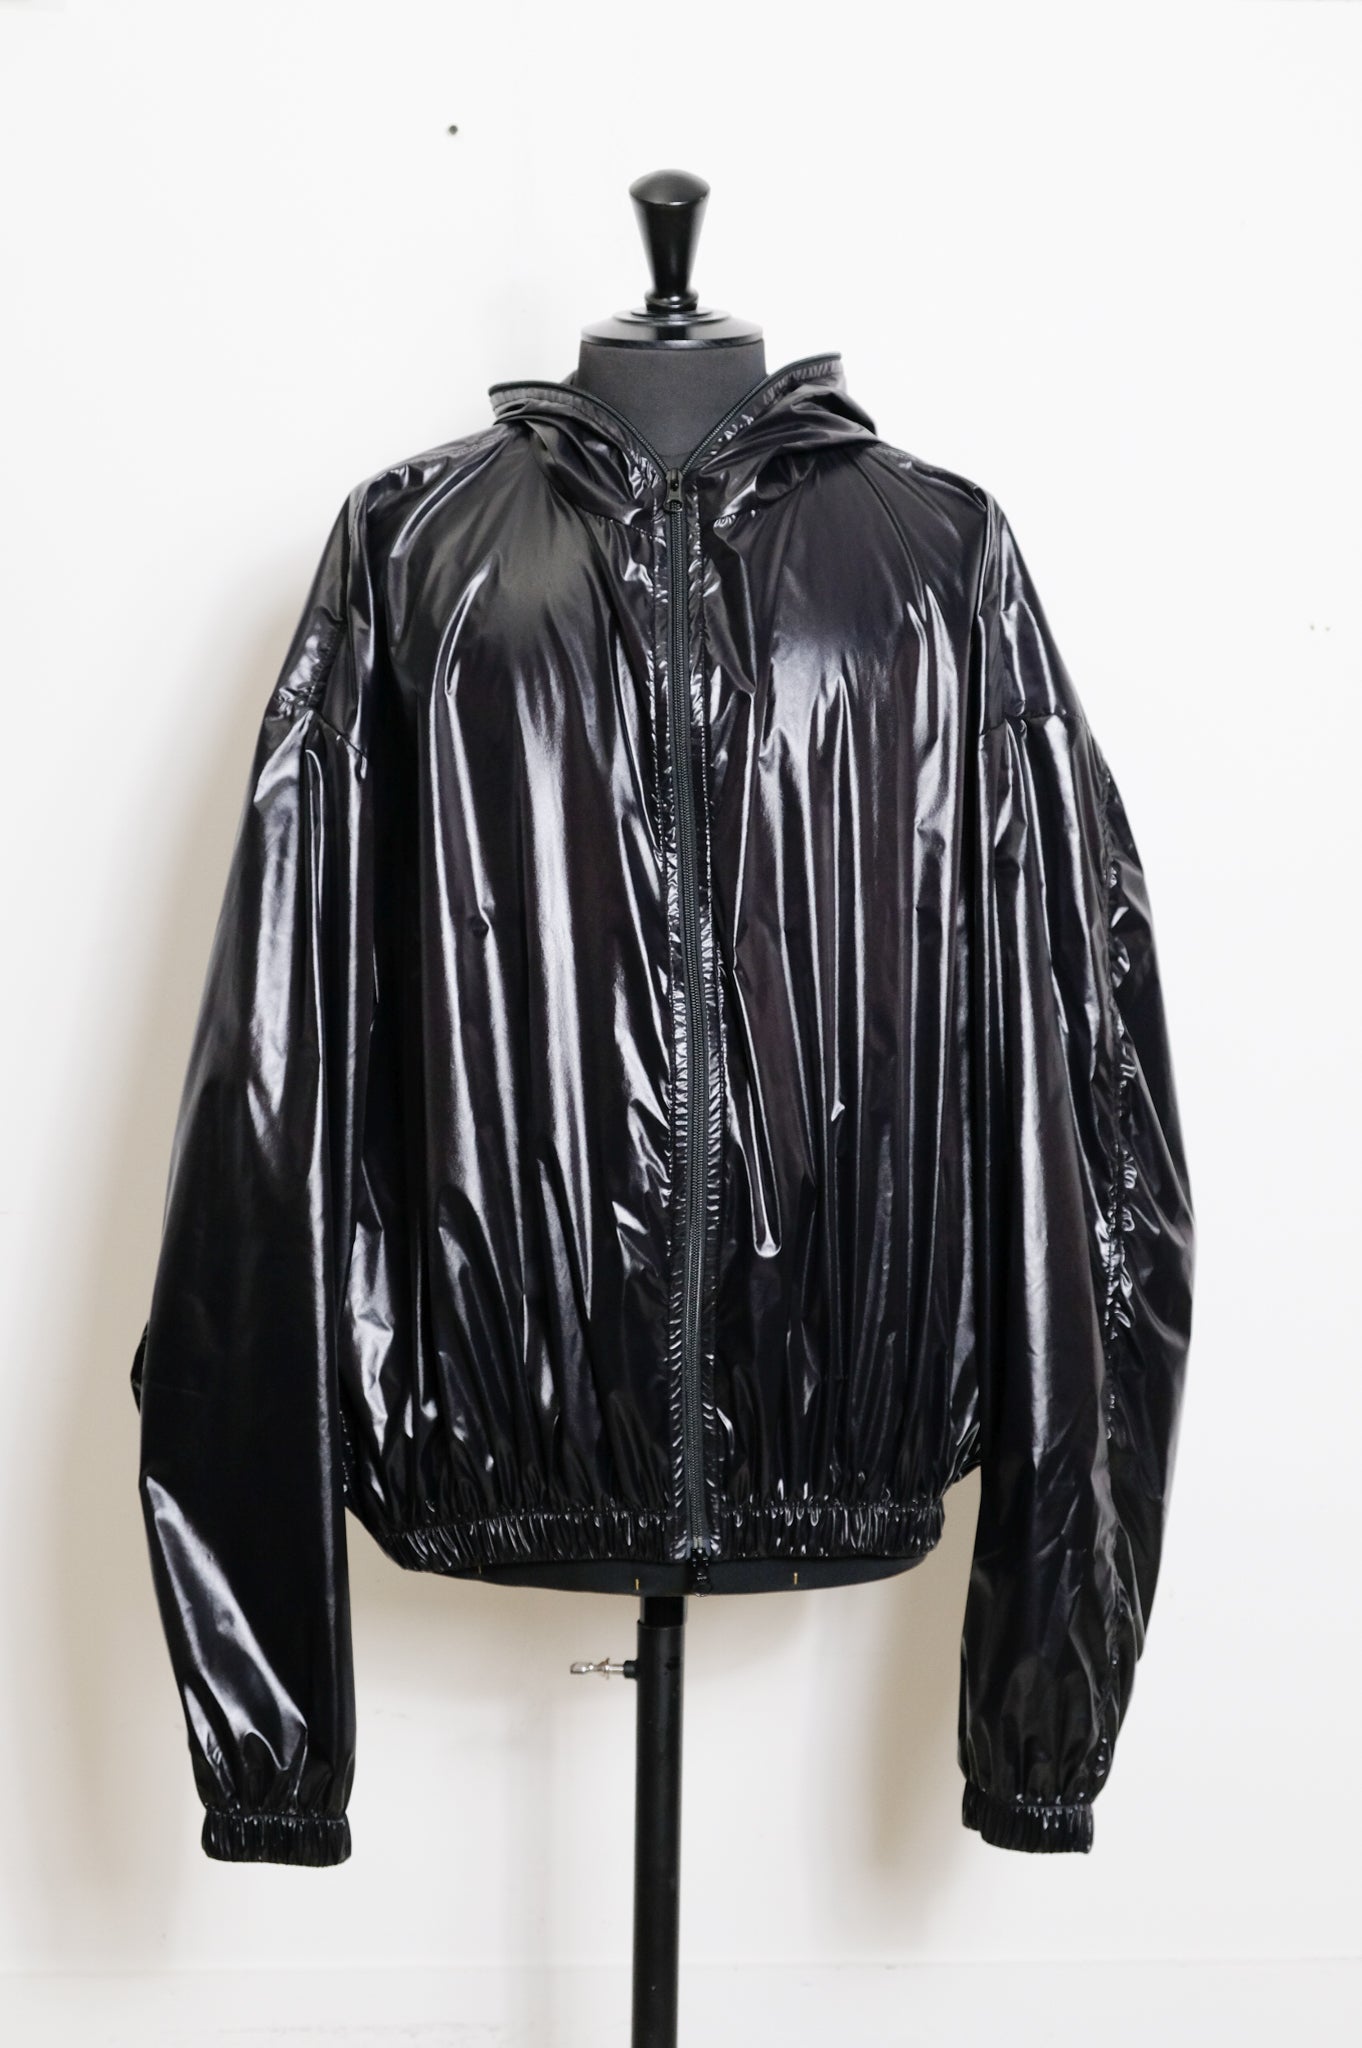 Gabriela Coll Garments "NO.216 RECYCLED LIMONTA HOODED ZIPPER JACKET"